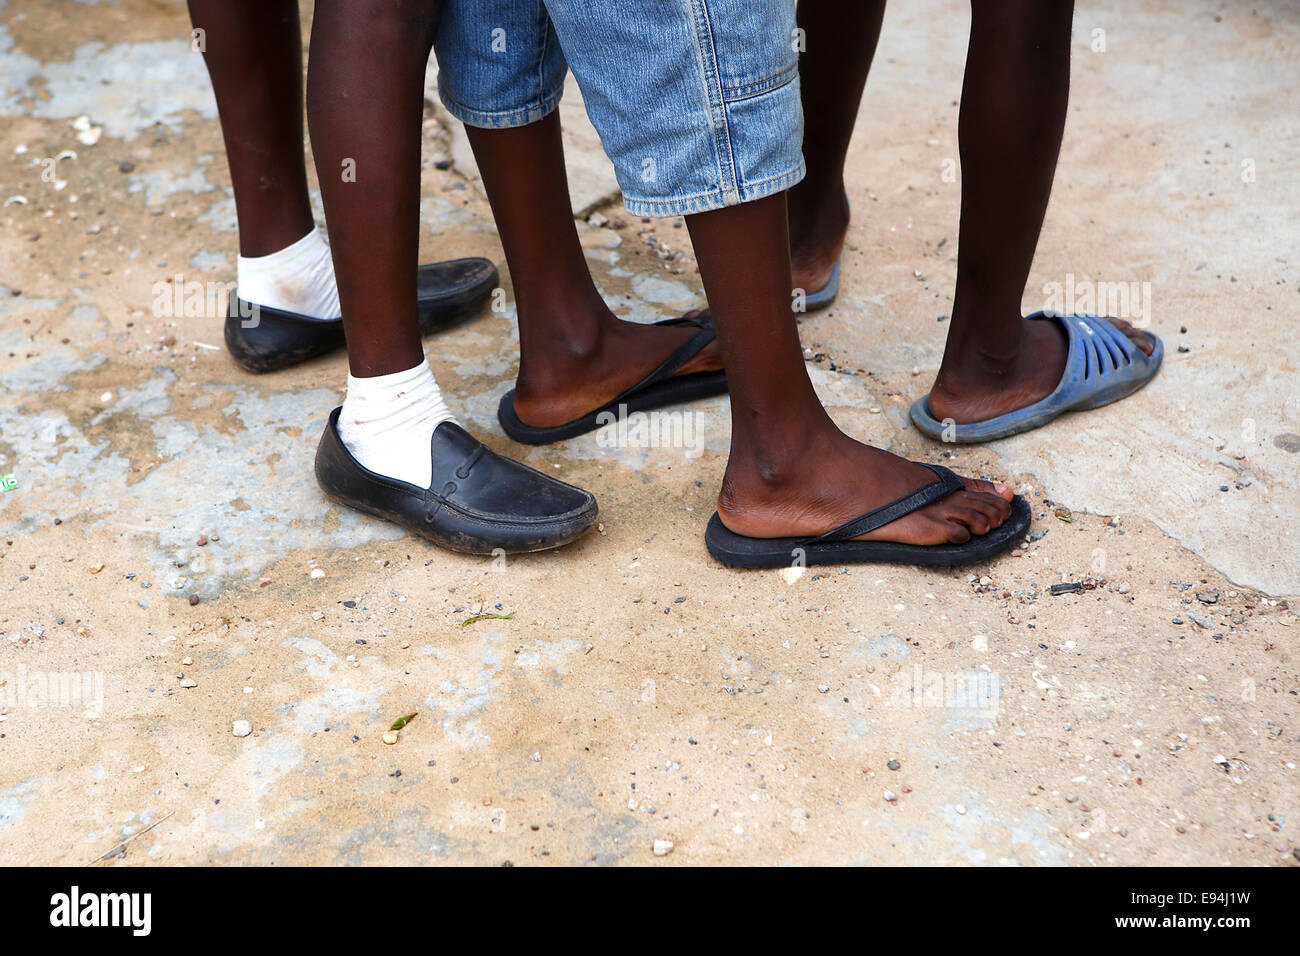 Feet of African men in different shoes waiting on a stony background Stock Photo